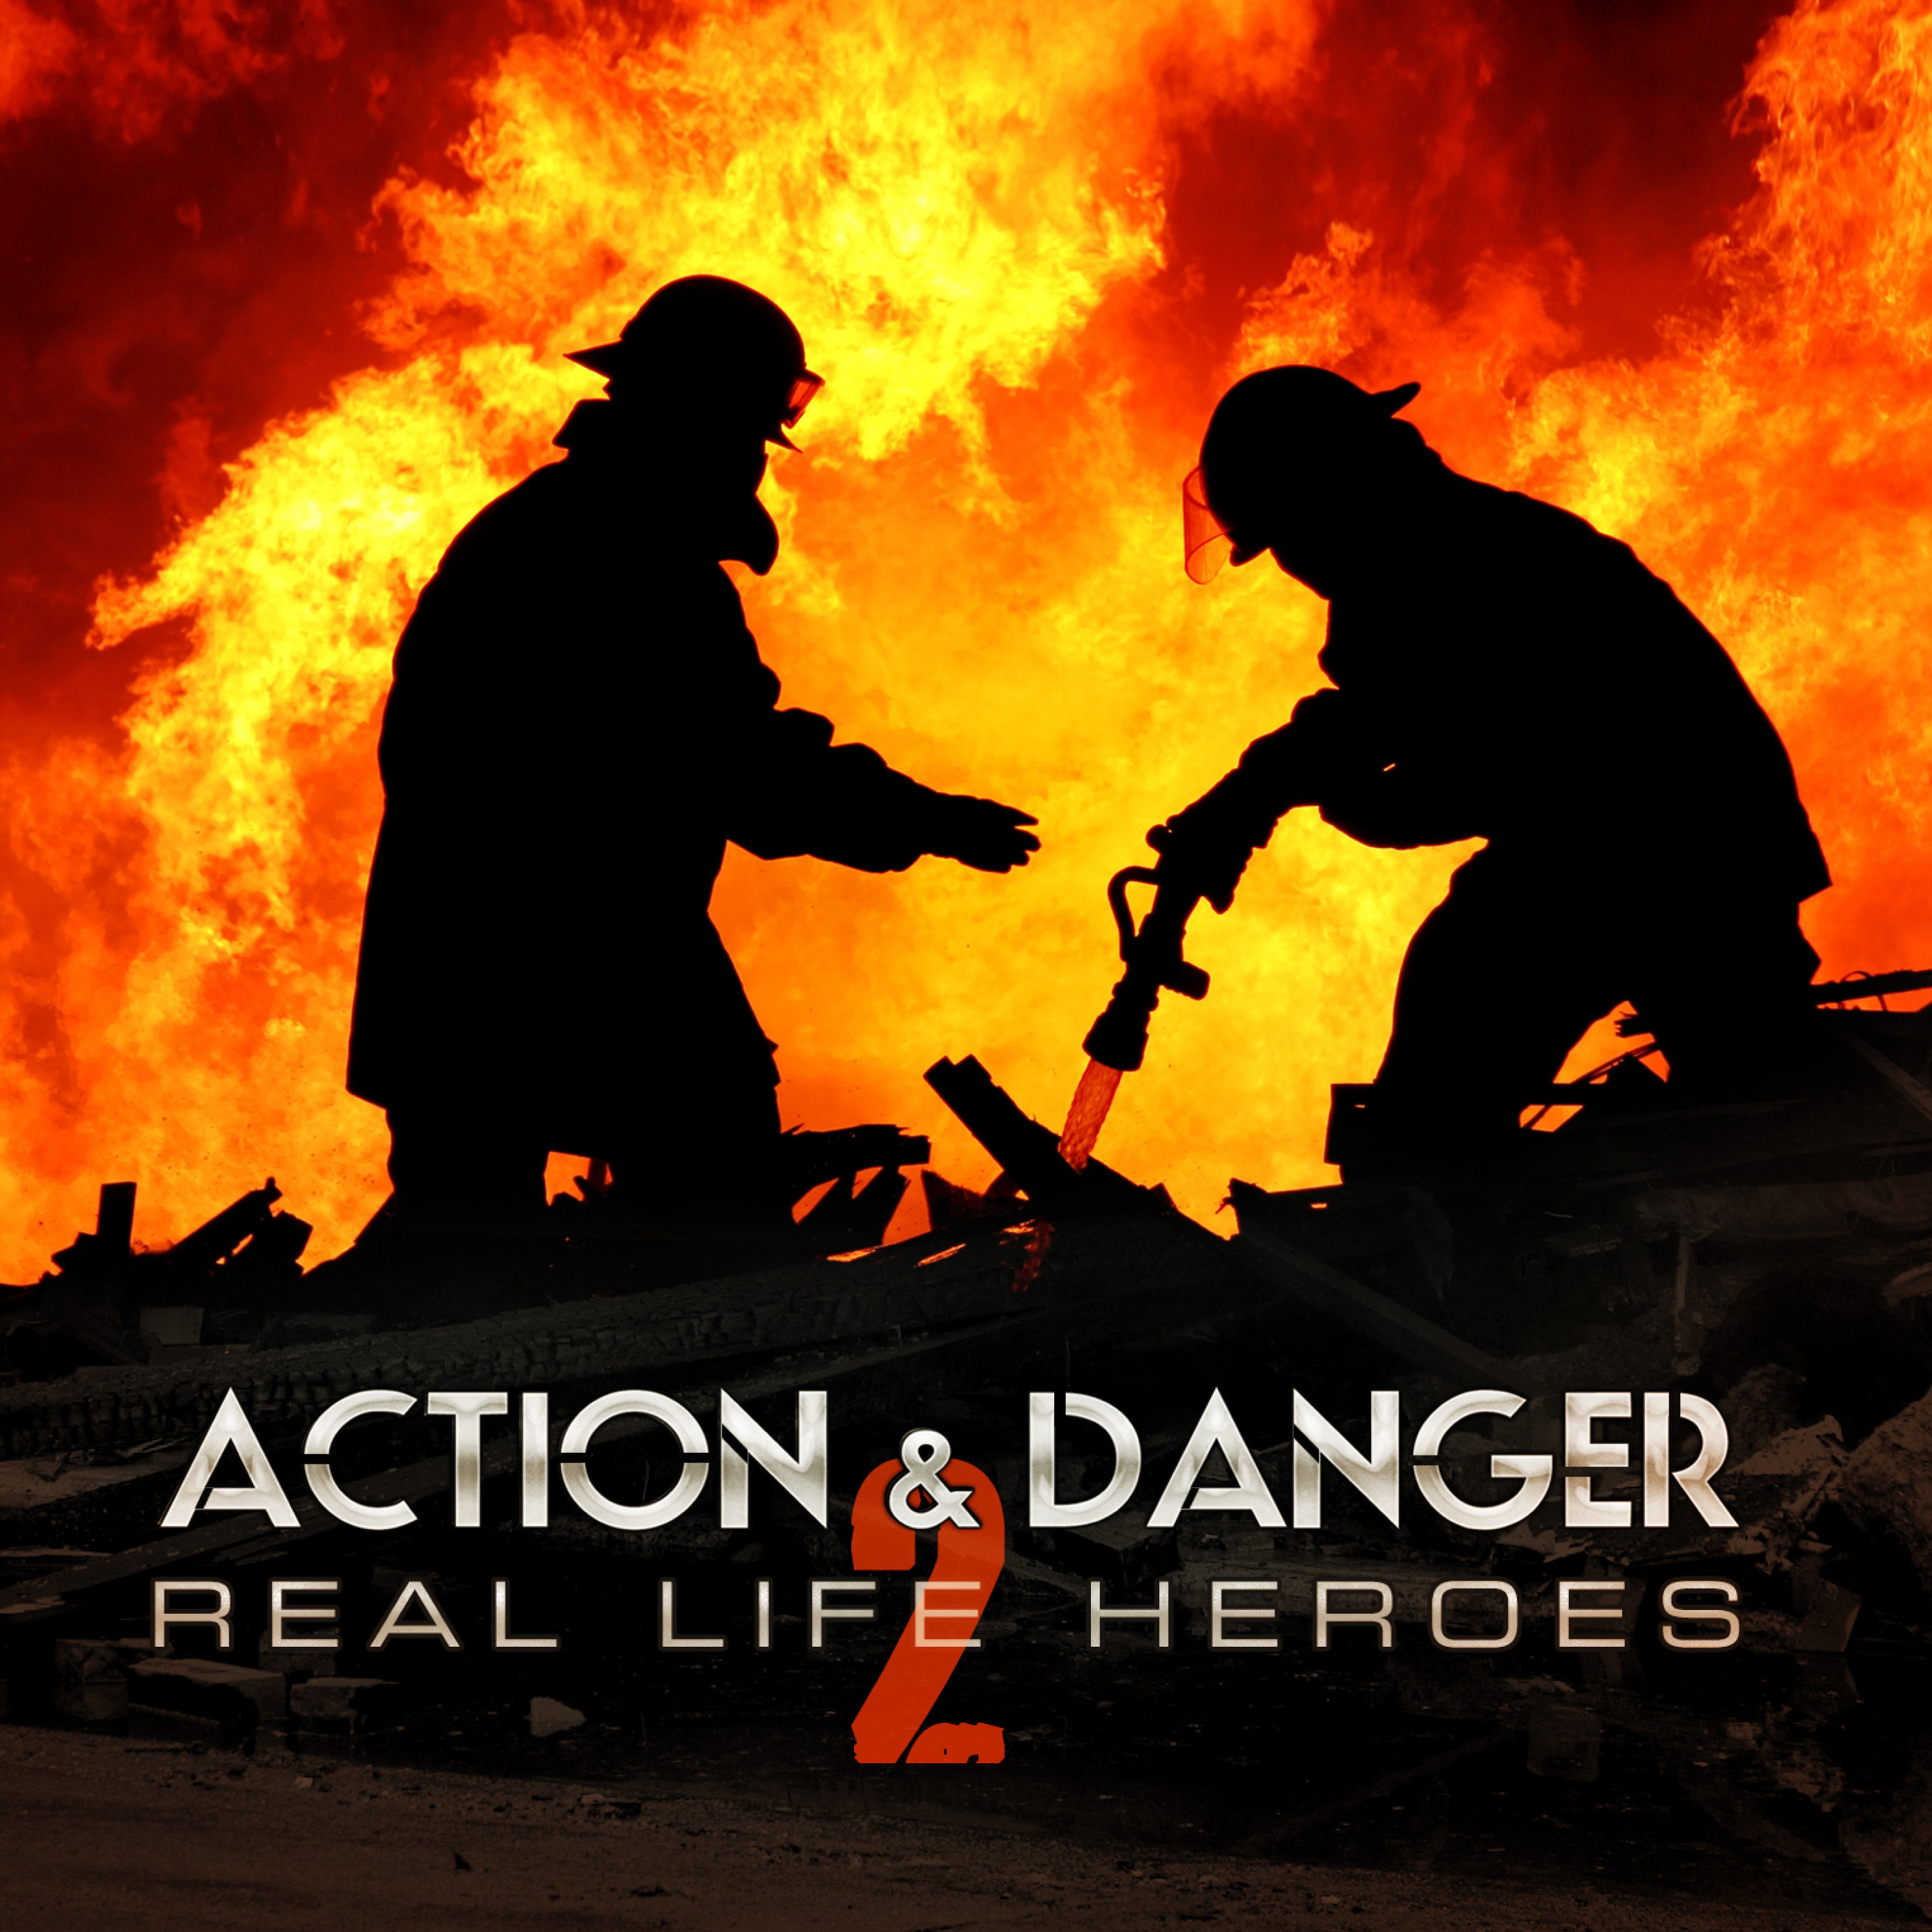 Action & Danger 2: Real Life Heroes.